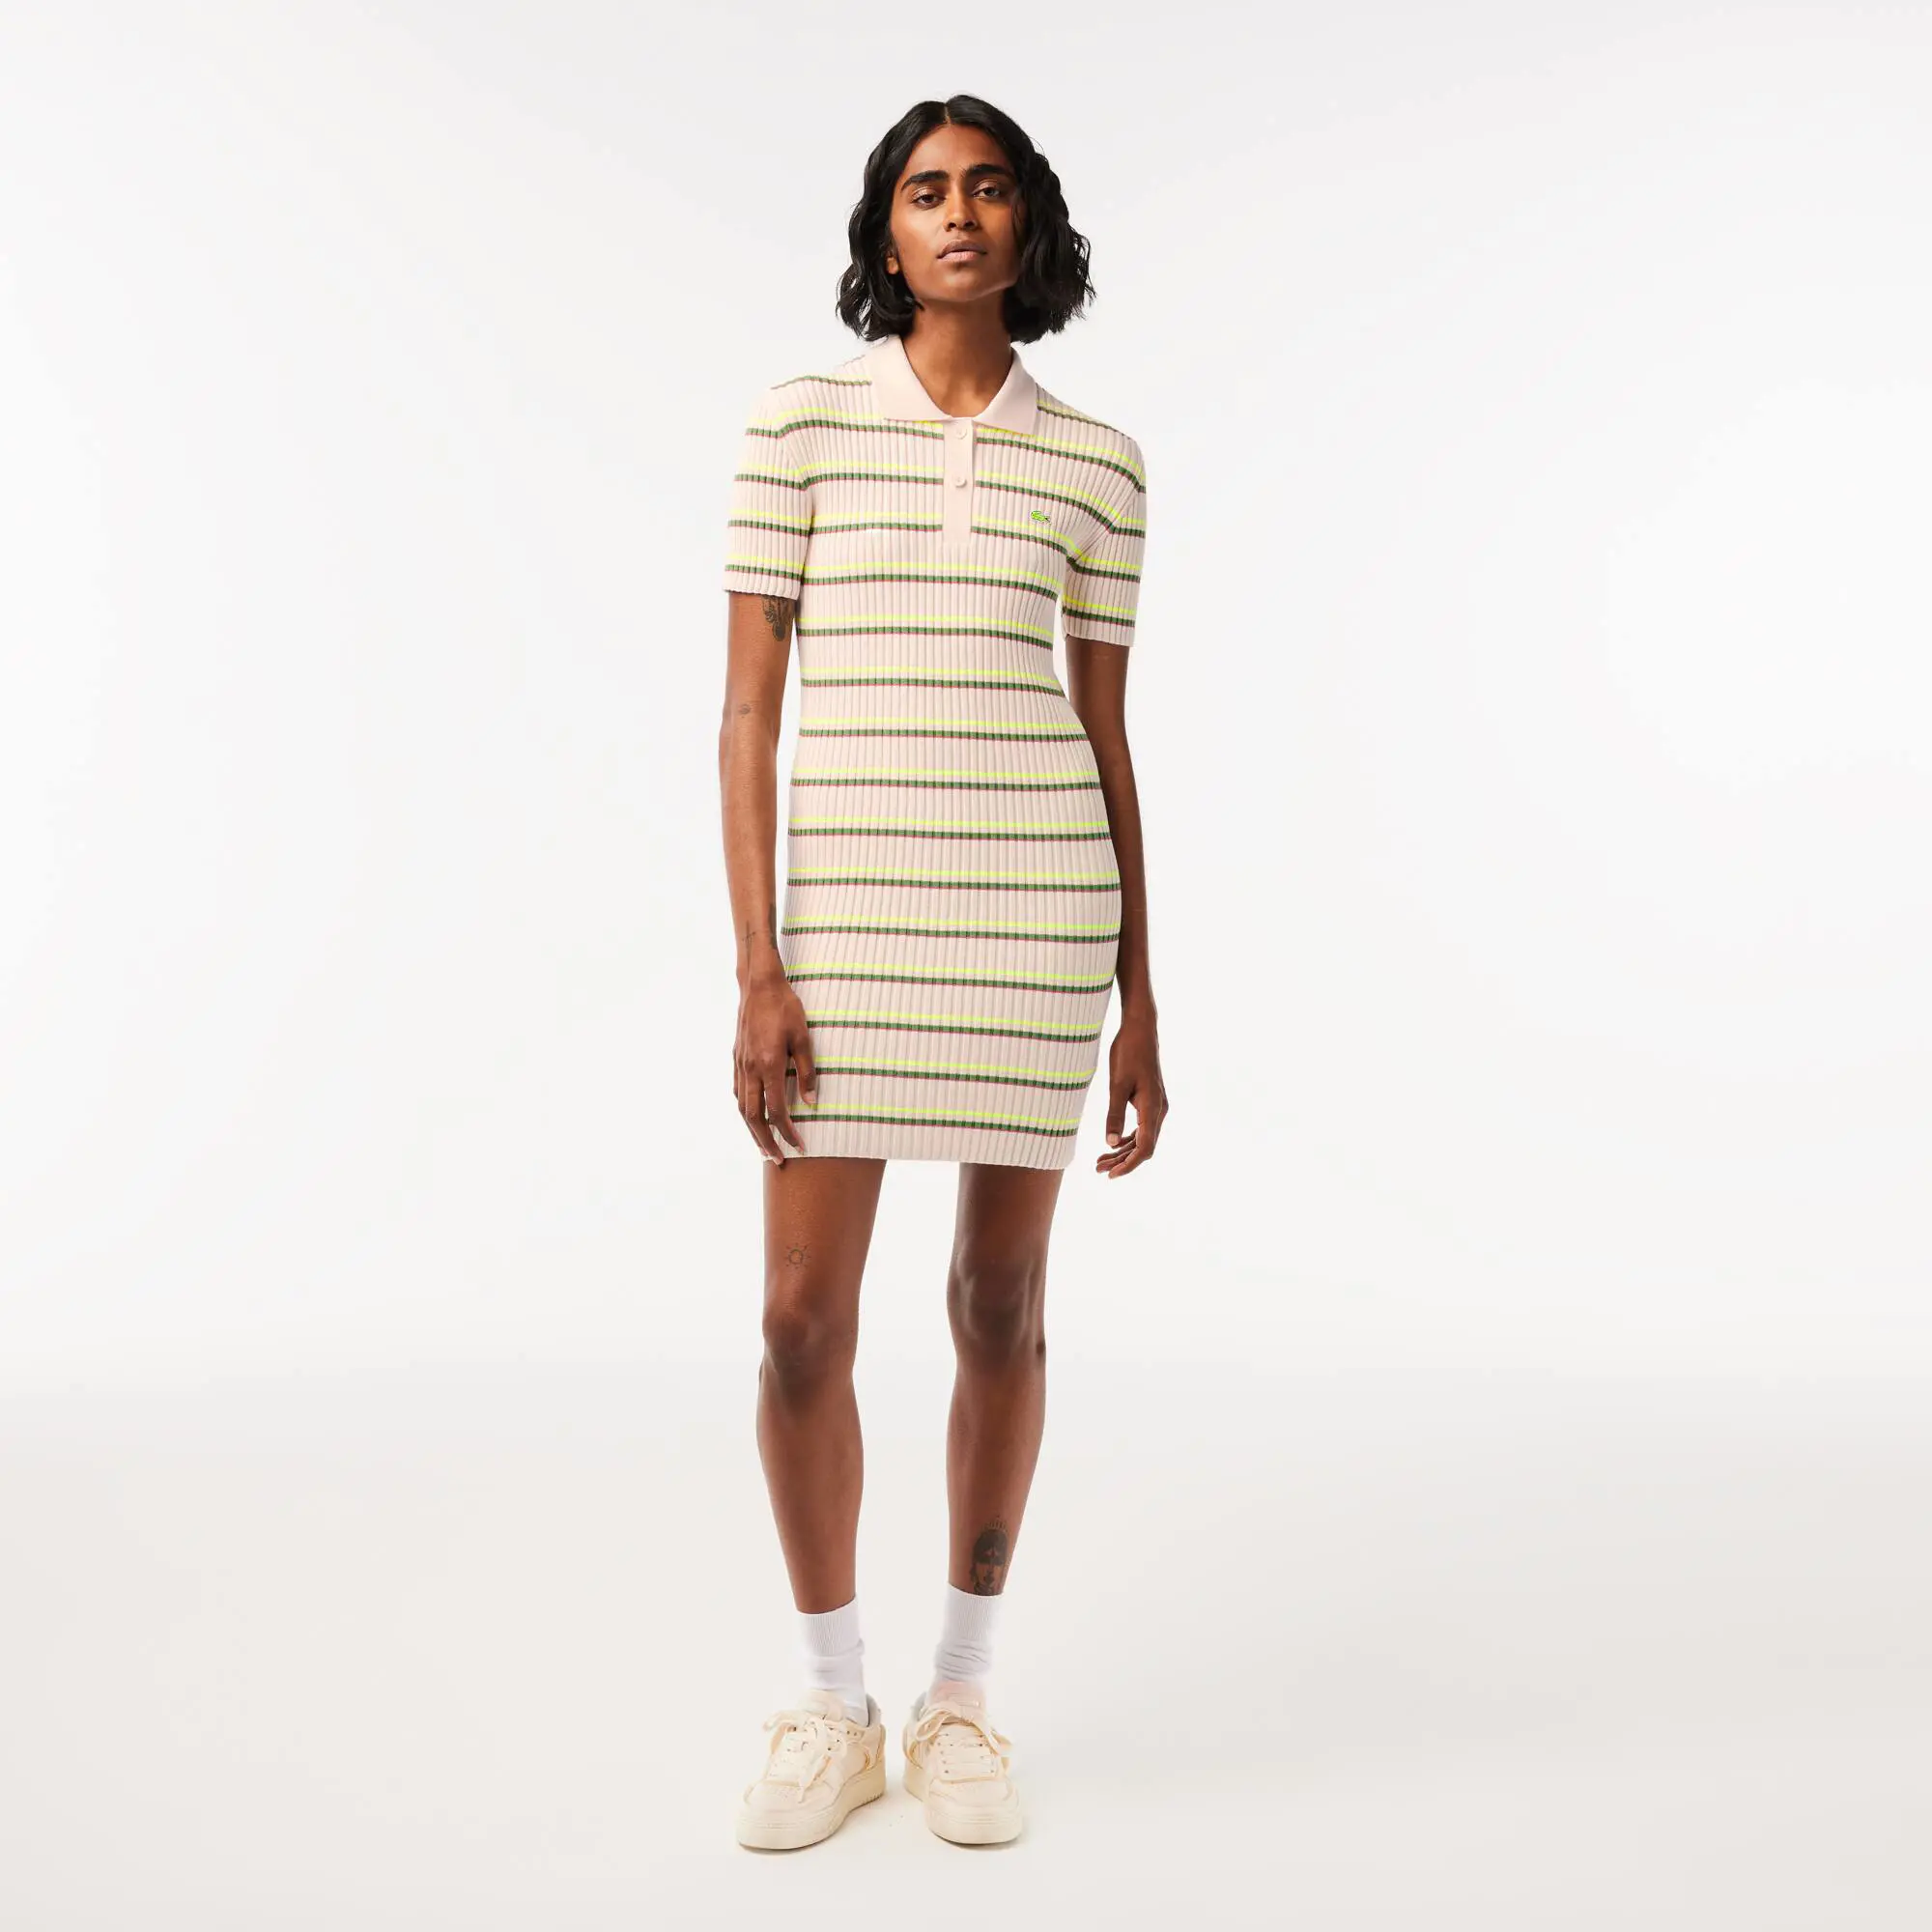 Lacoste Women’s Lacoste French Made Striped Polo Dress. 1